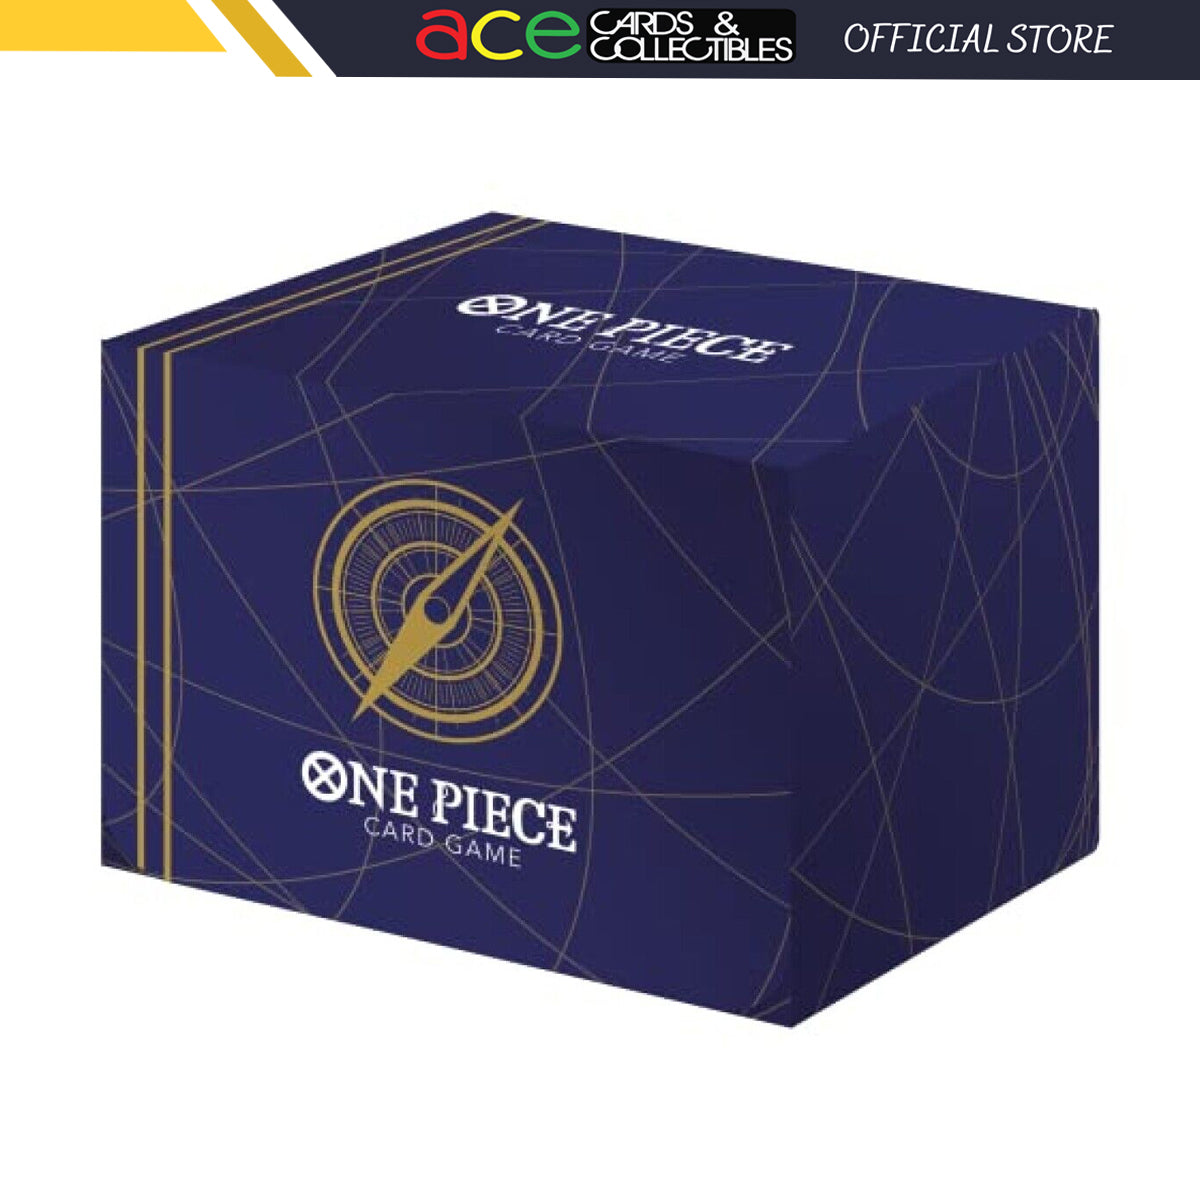 One Piece Card Game Card Case 2022 &quot;Standard Blue&quot;-Bandai-Ace Cards &amp; Collectibles